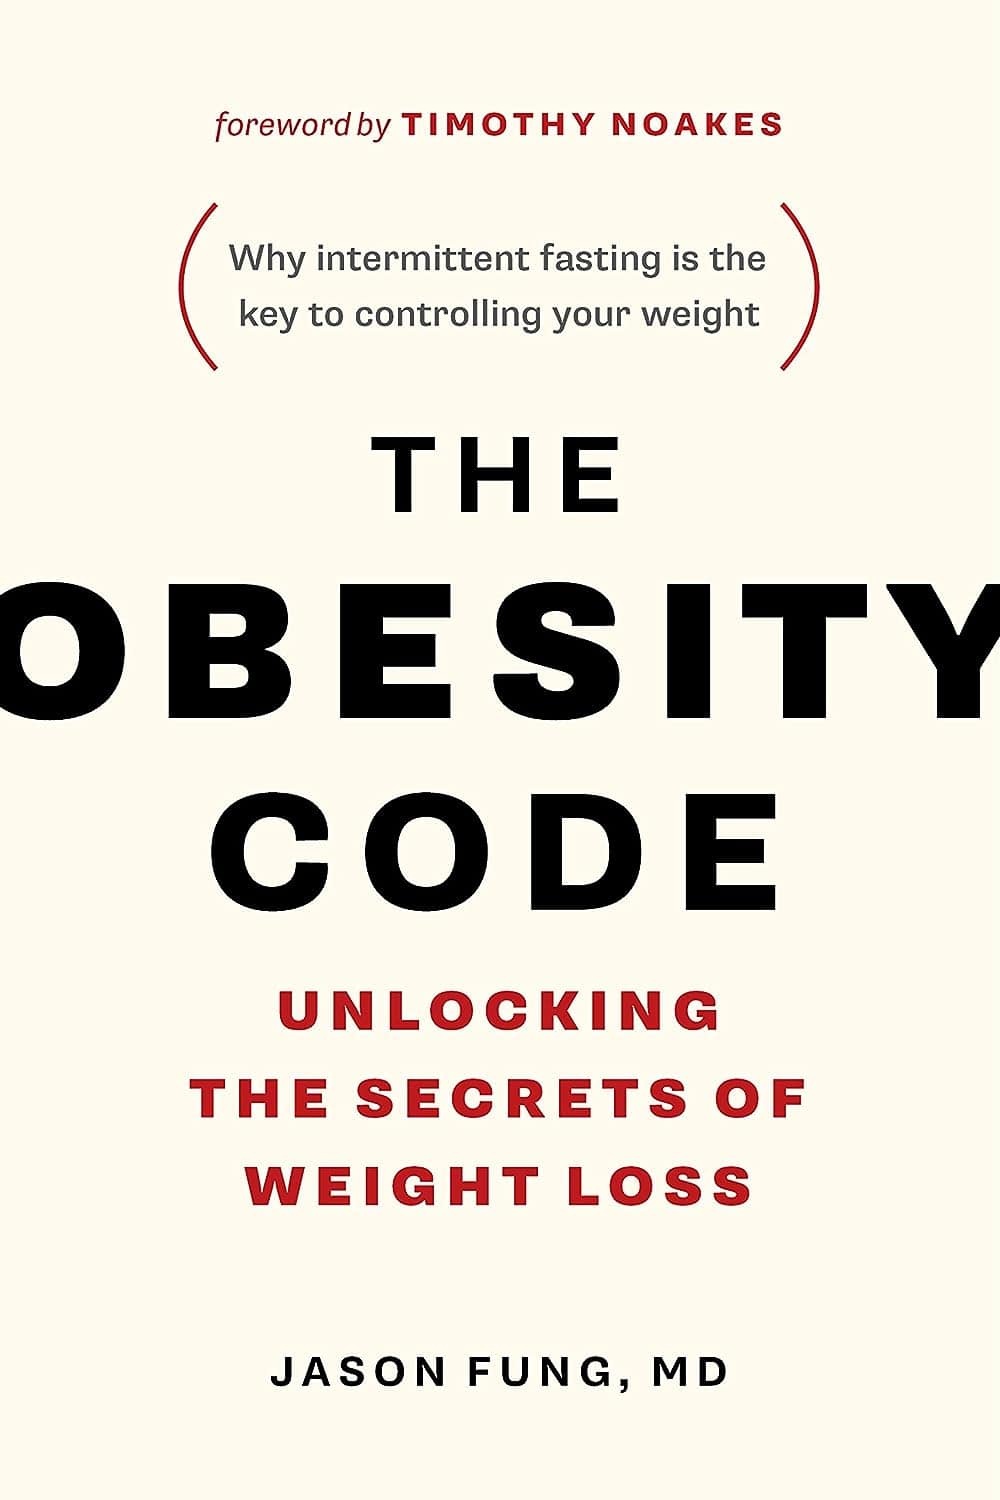 The Obesity Code: Unlocking the Secrets of Weight Loss – Dr. Jason Fung, Timothy Noakes